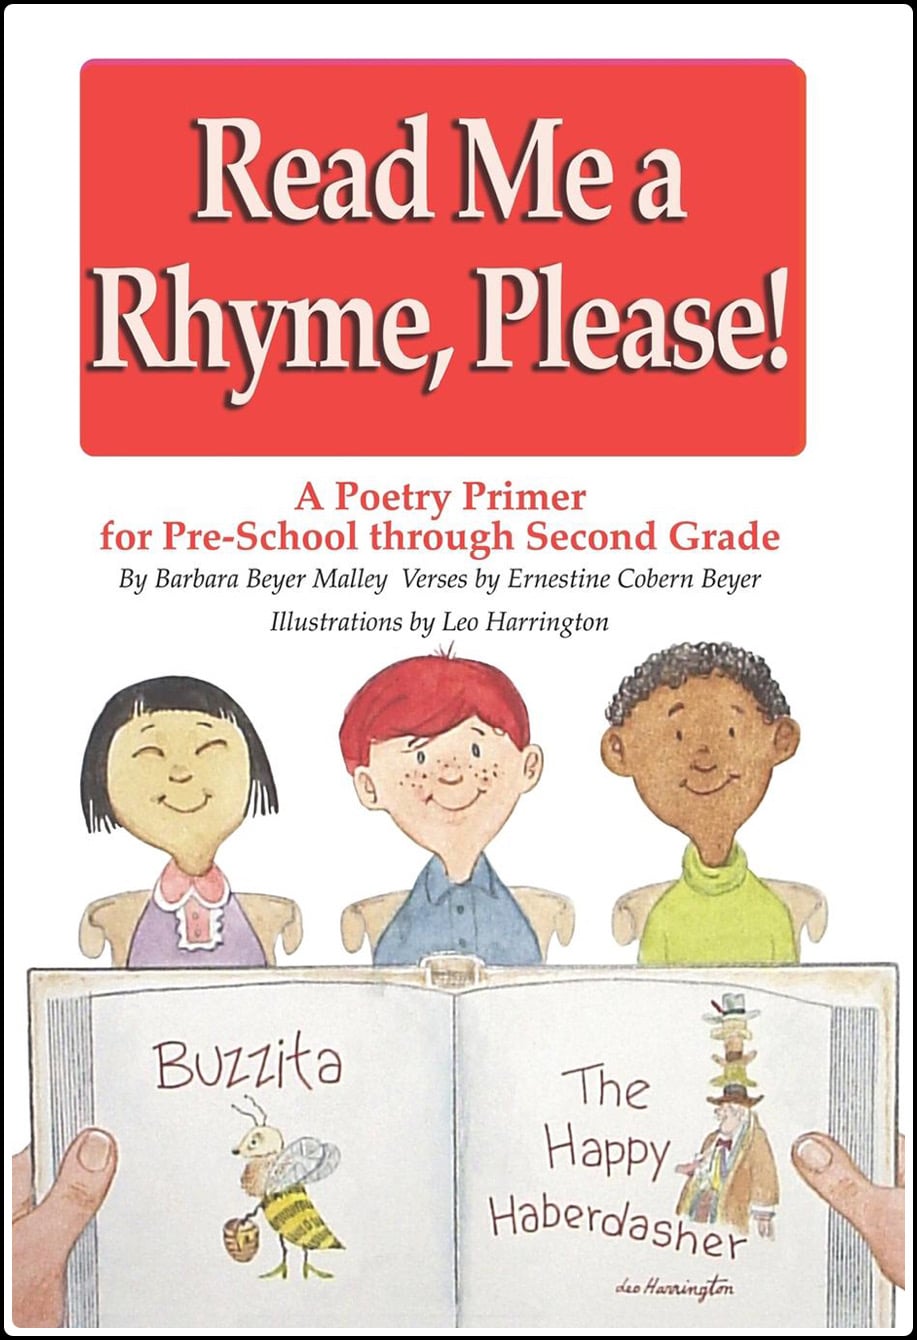 Read Me a Rhyme Please: A Poetry Primer for Pre-School through Second Grade book cover